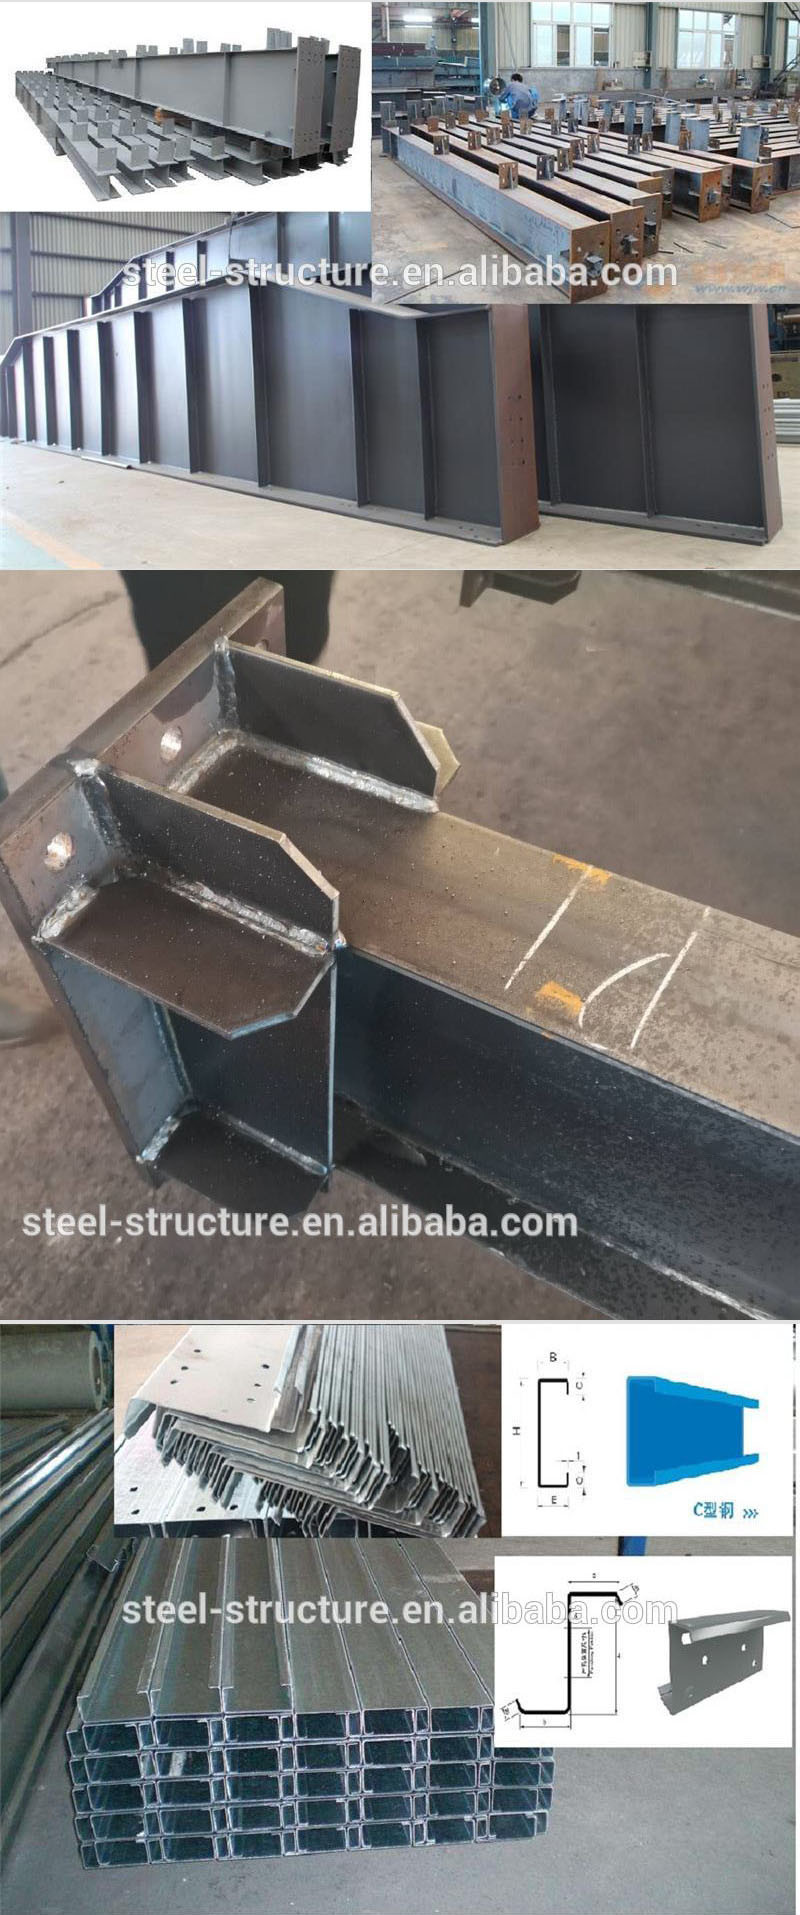 Peb Standard Steel Structure Standard Size Girt C Purlins and Z Purlins